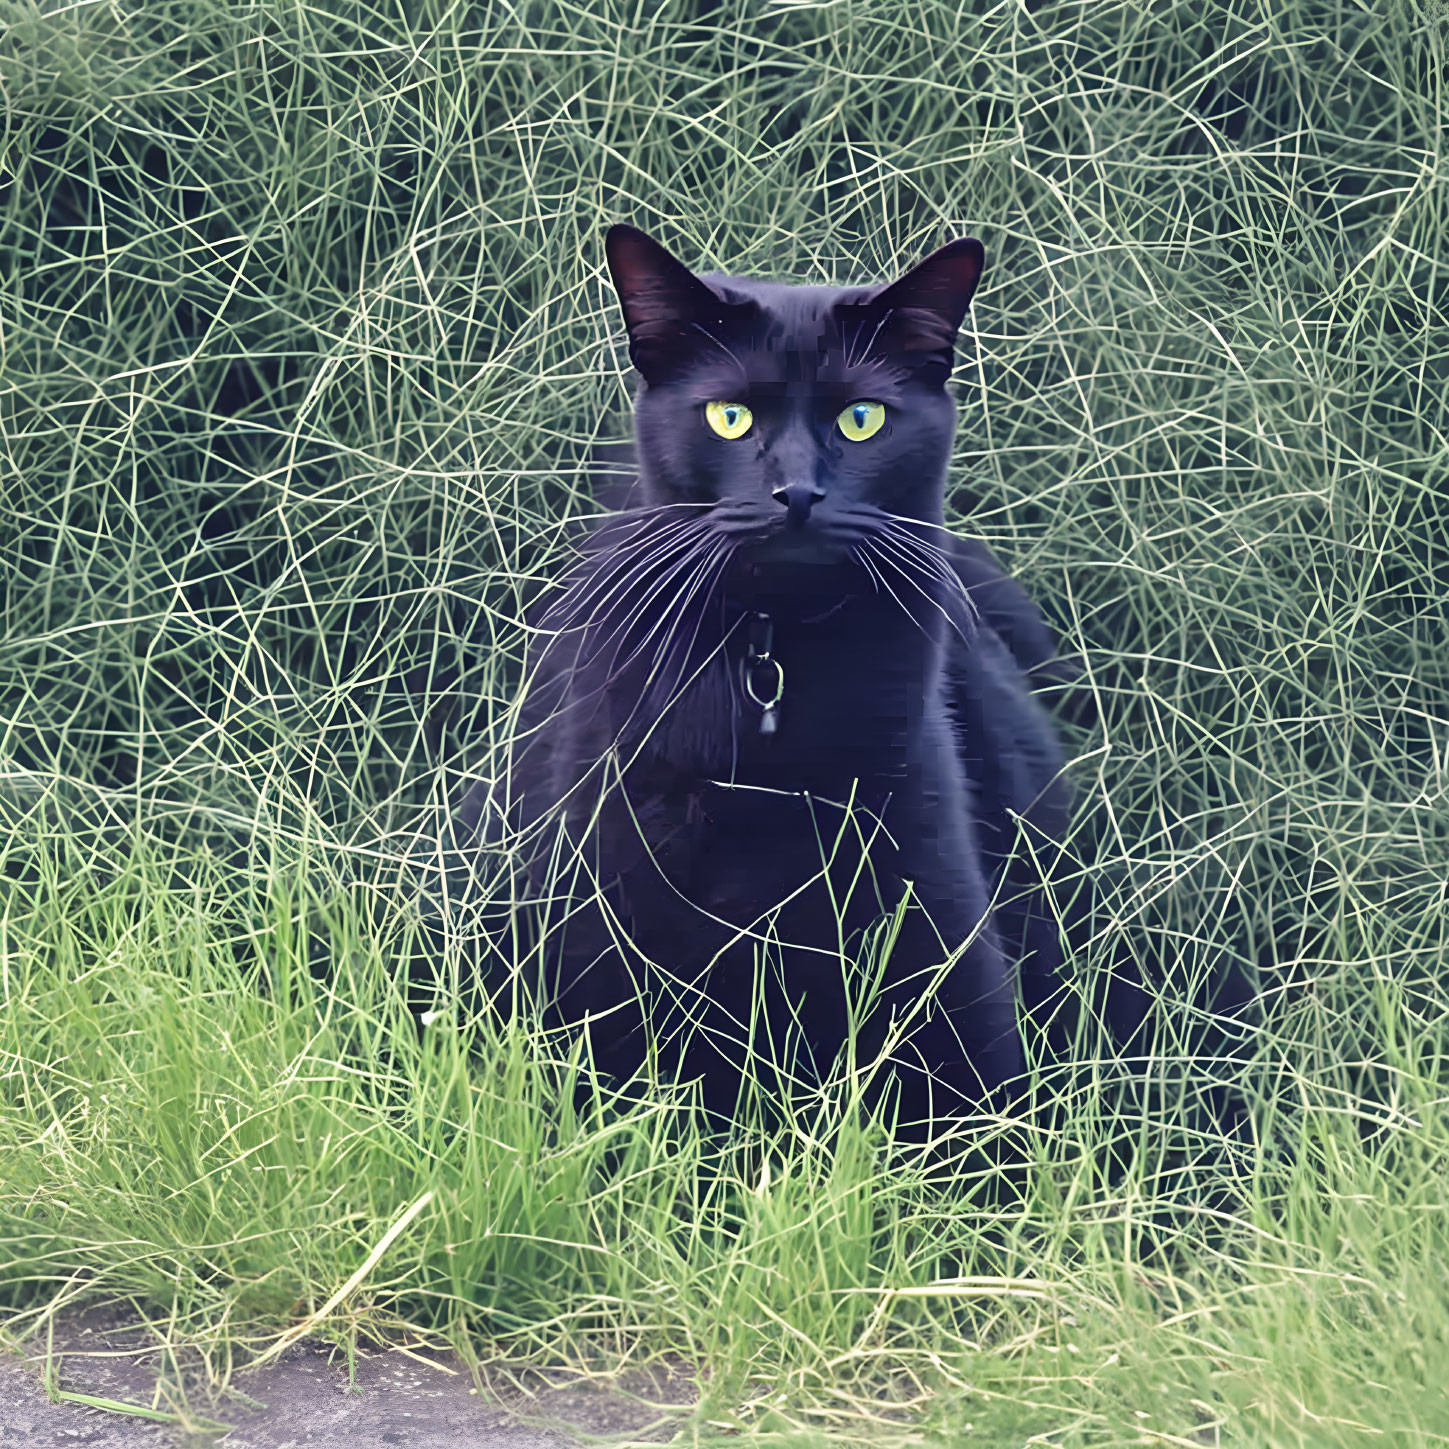 Black Cat with Luminous Green Eyes in Tall Grass